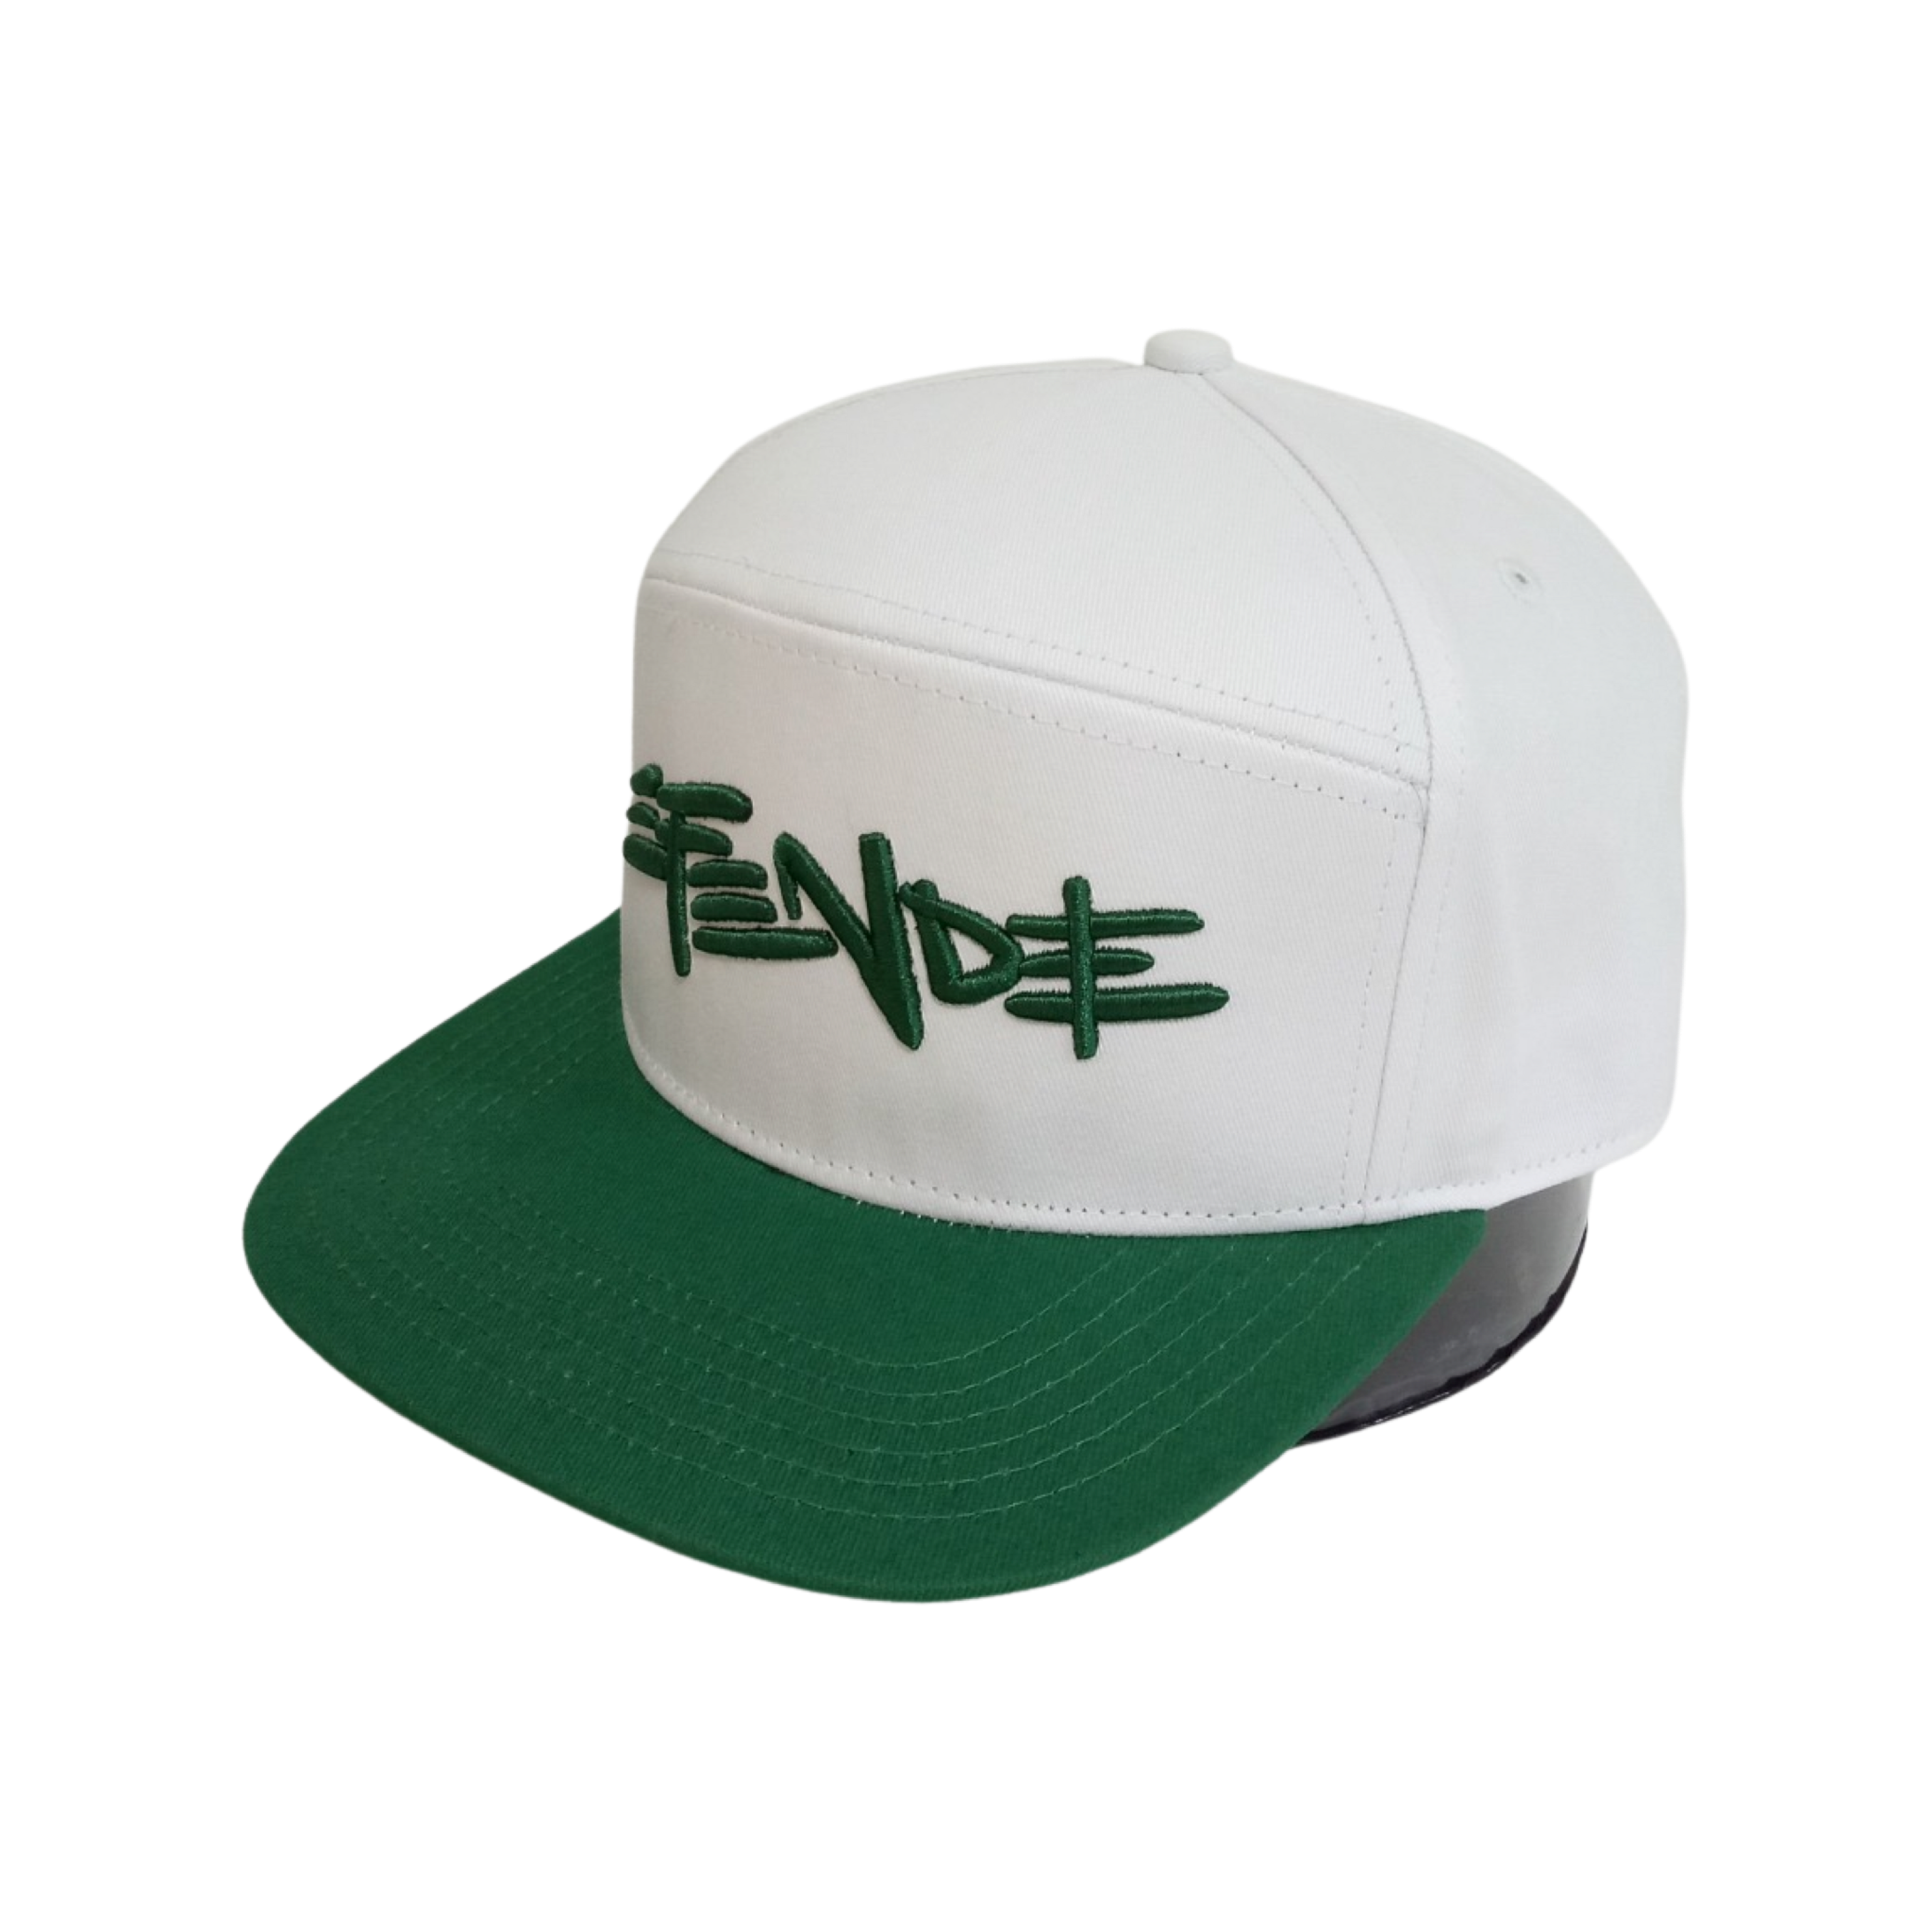 EFENDEE 7 Panel Hat - Green and White